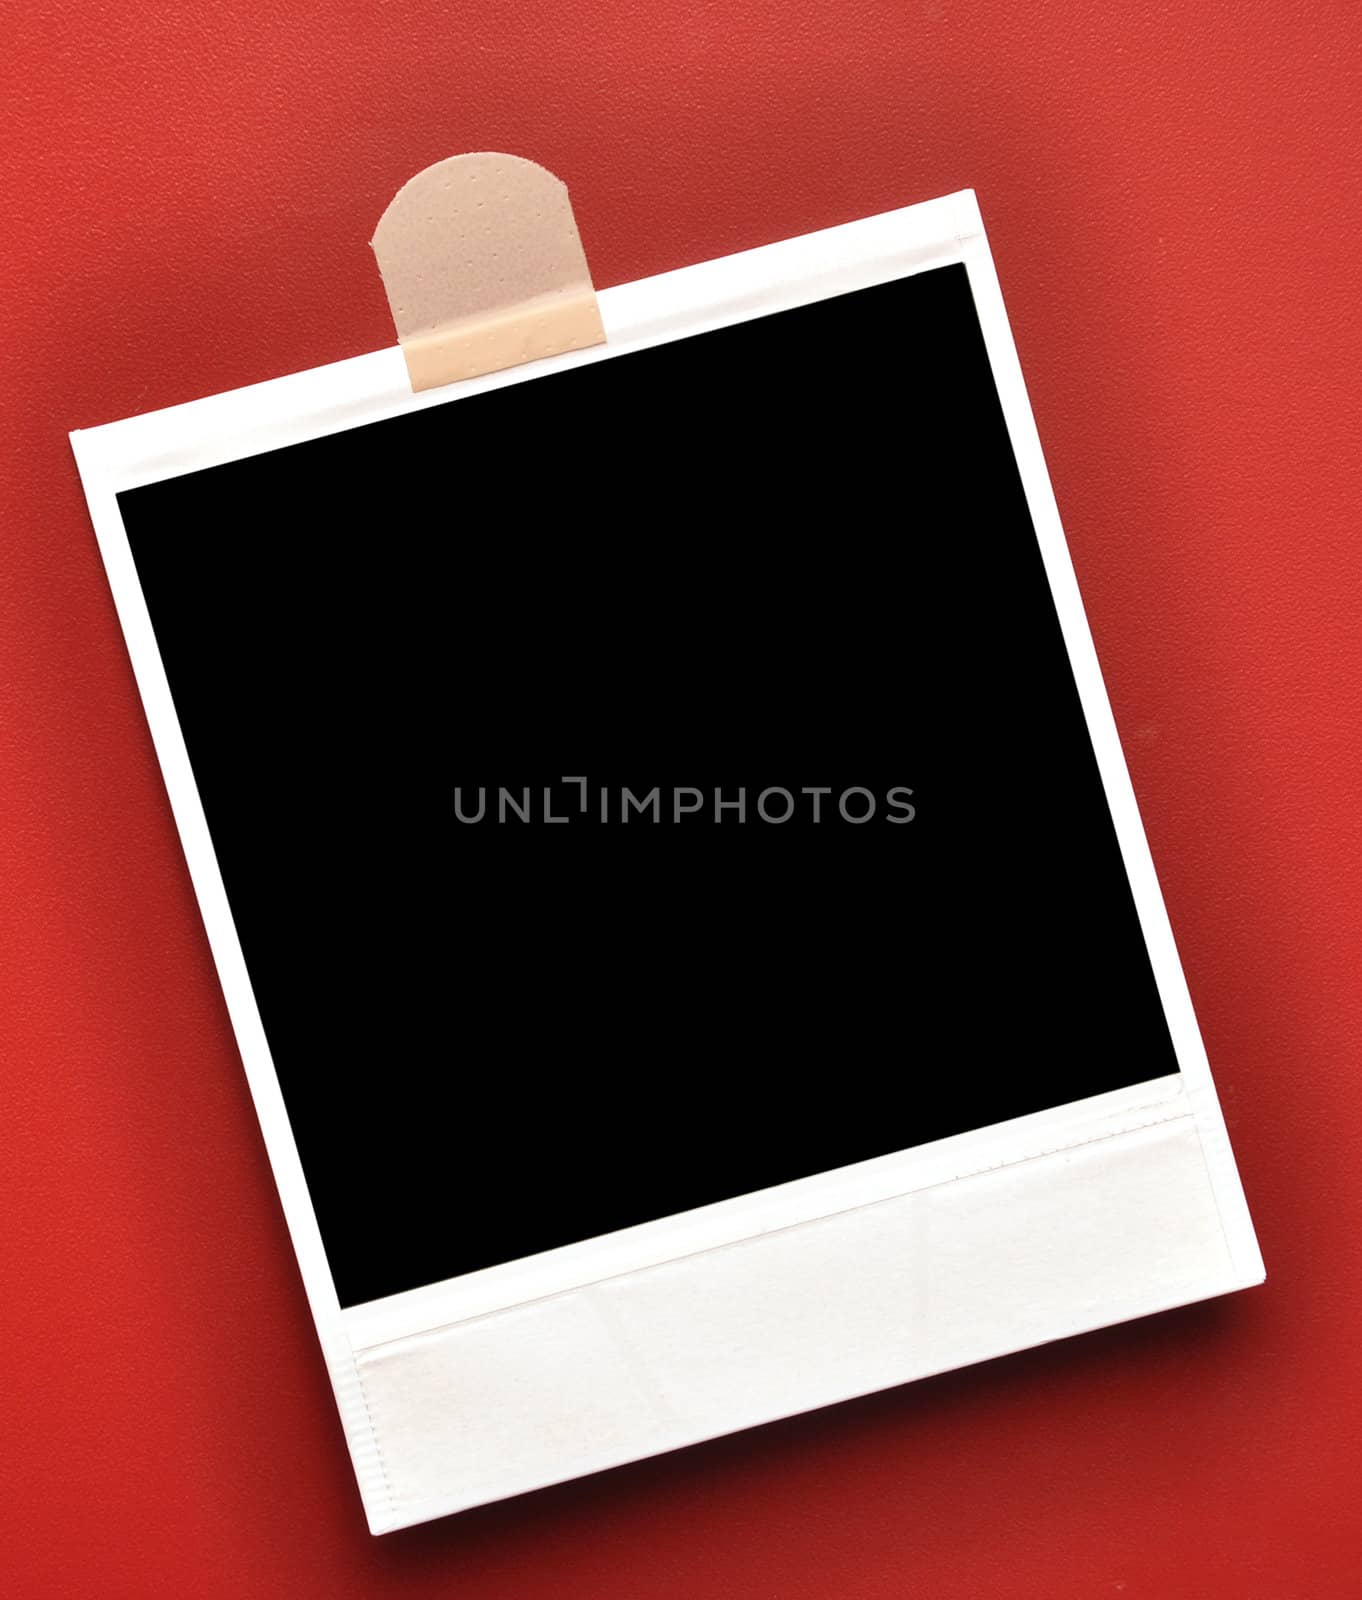 photo frame pressed to the red background